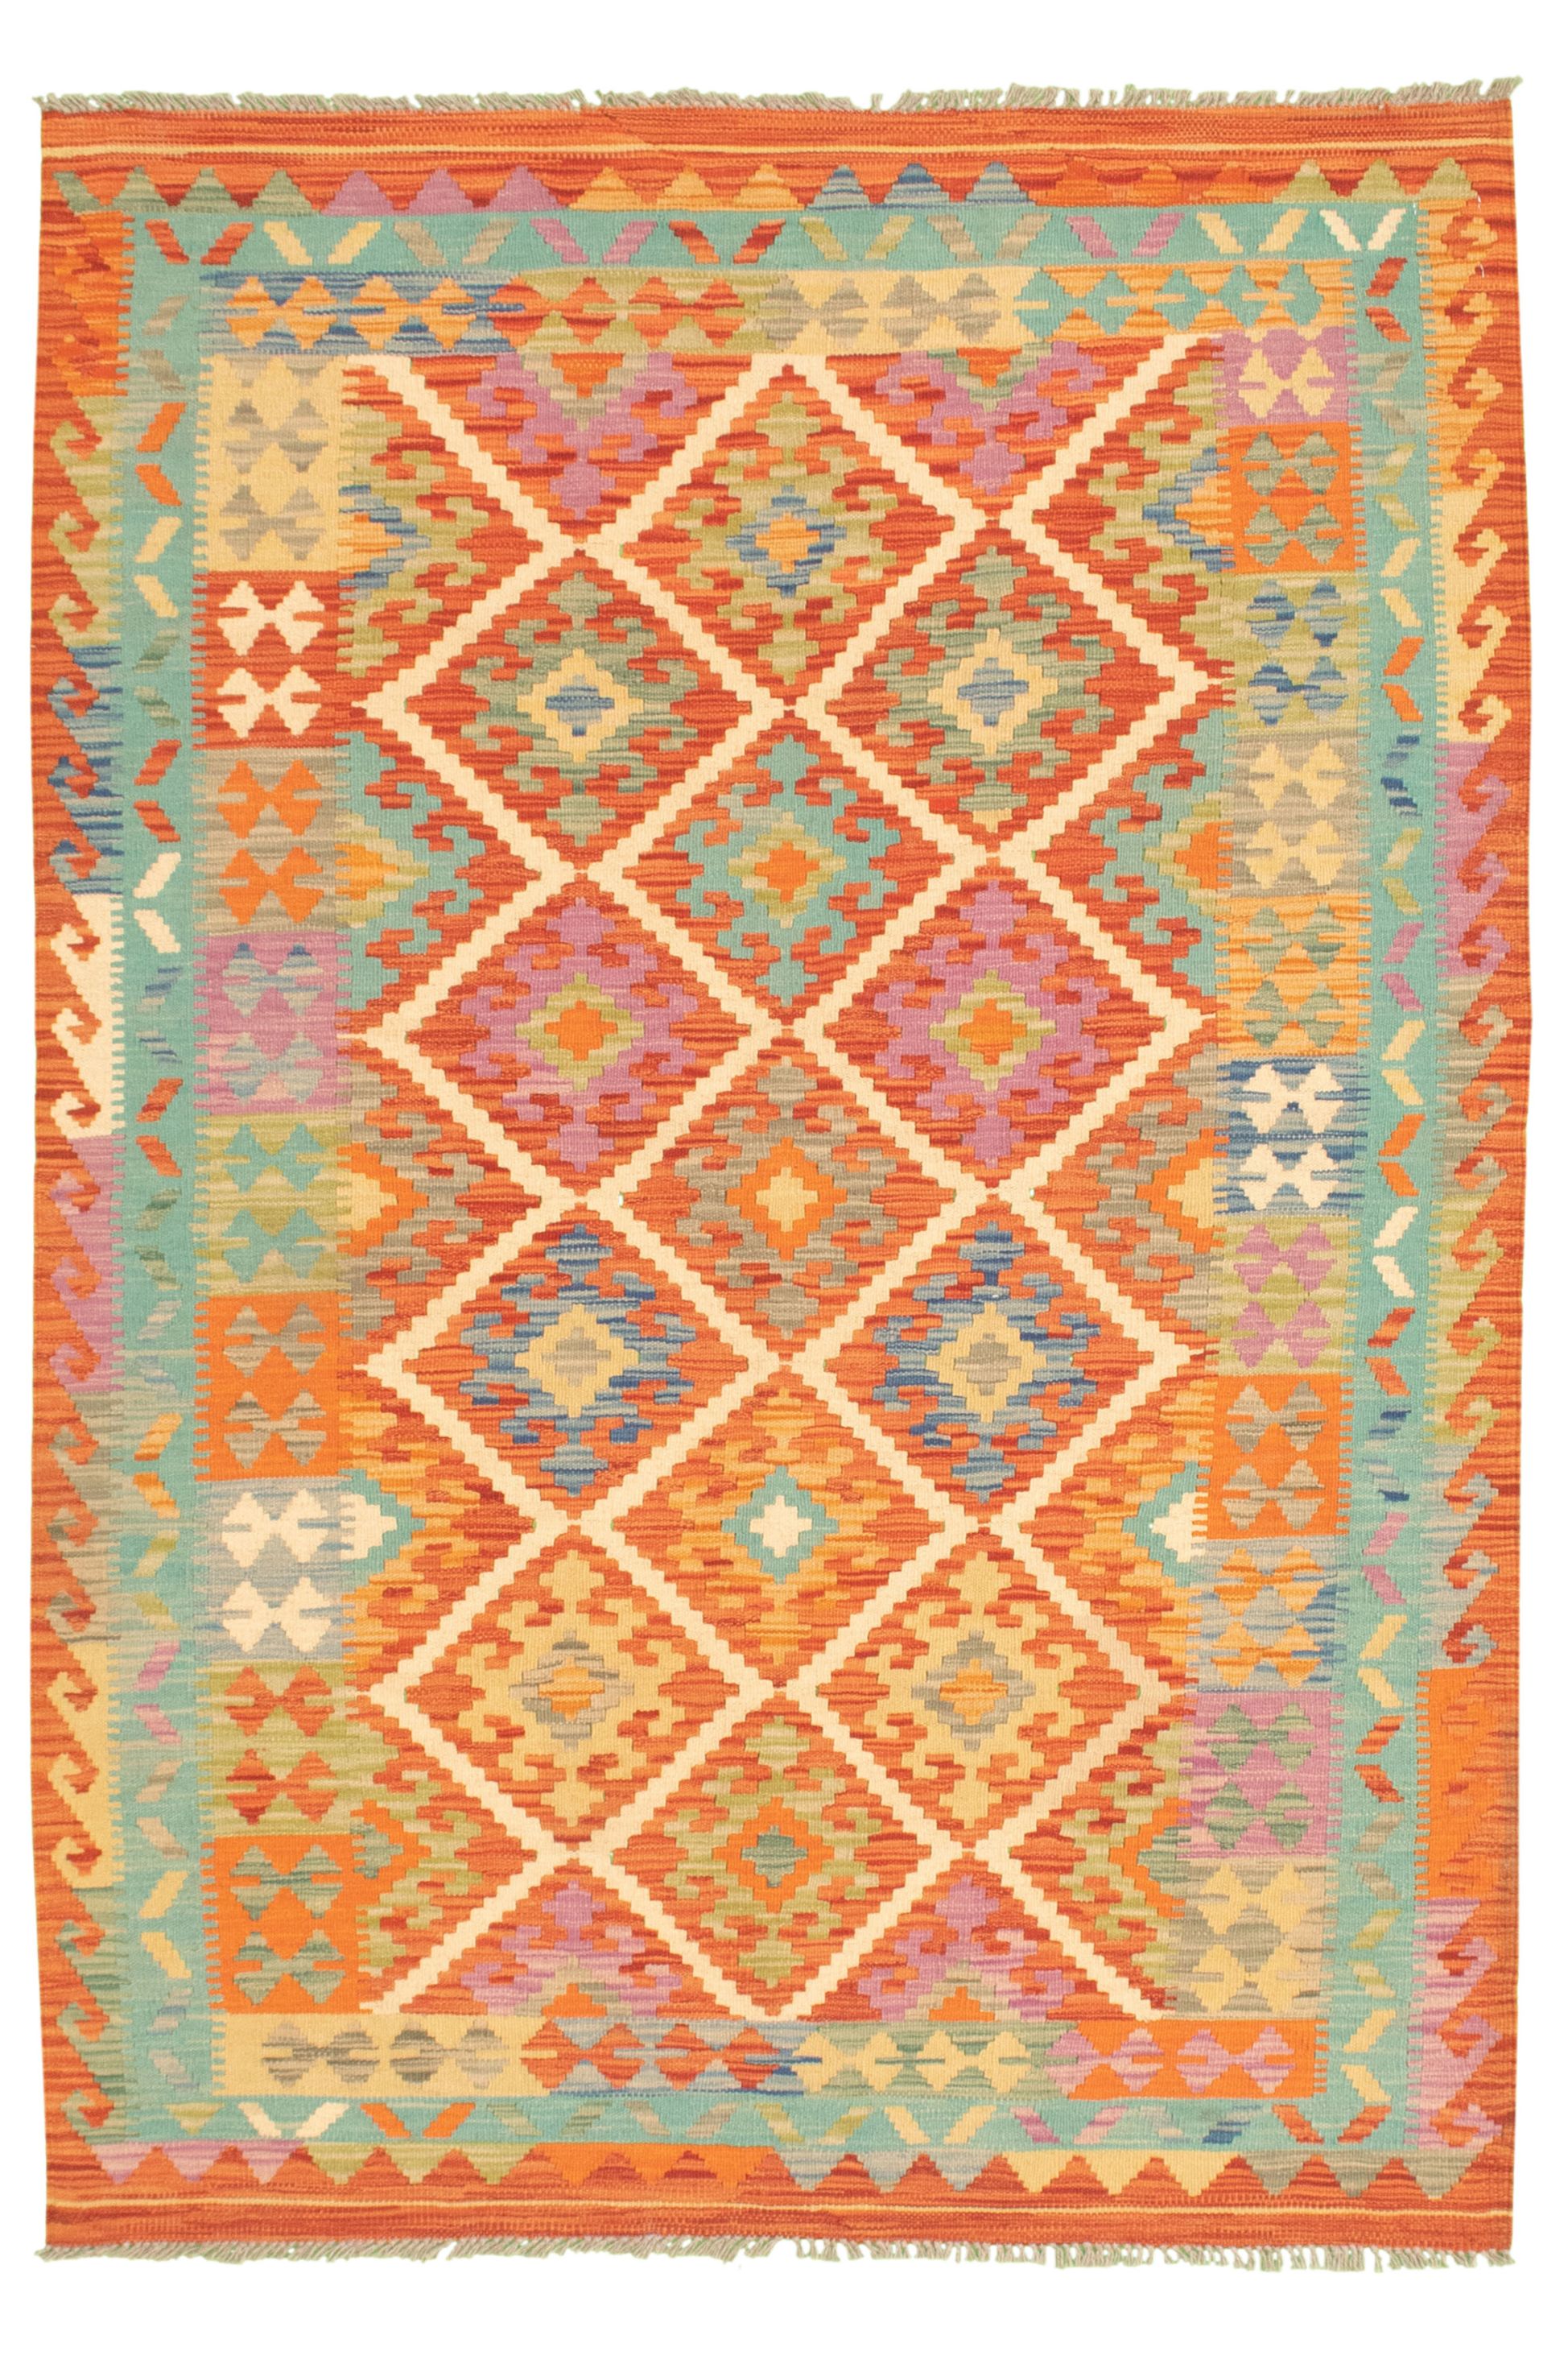 Hand woven Bold and Colorful  Dark Copper Wool Kilim 4'3" x 6'5"  Size: 4'3" x 6'5"  